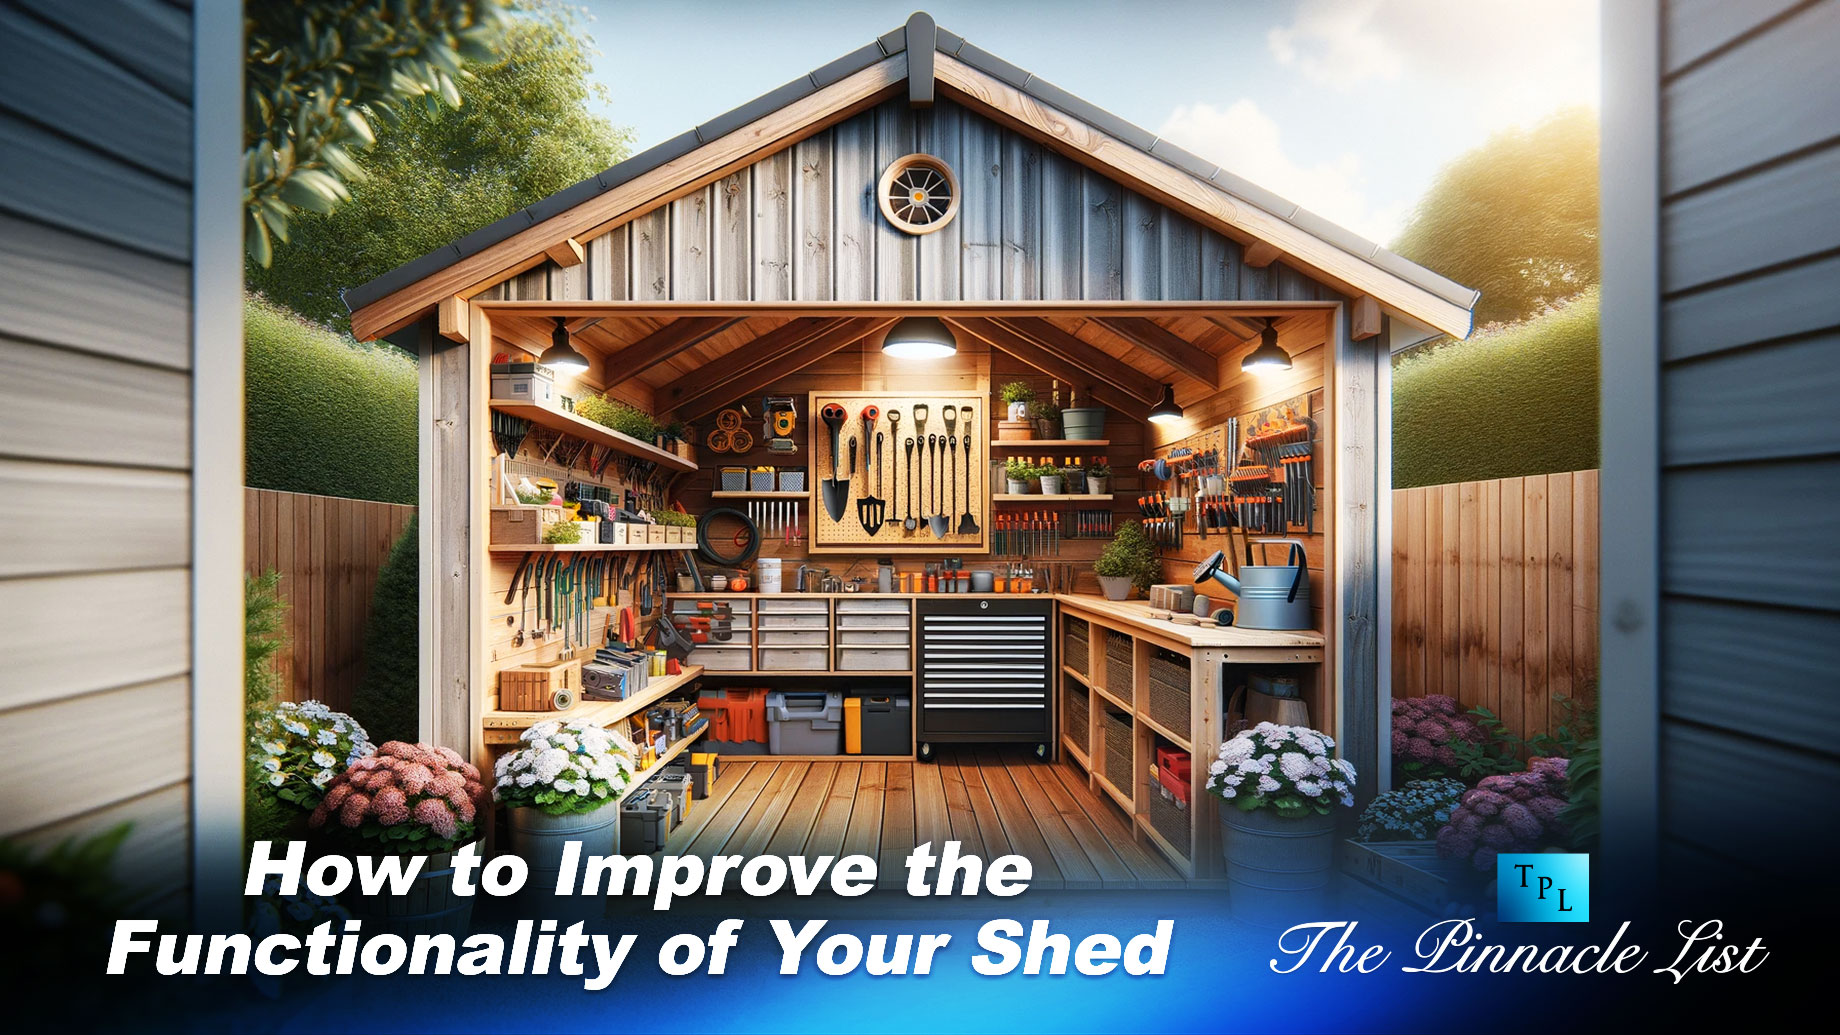 How to Improve the Functionality of Your Shed